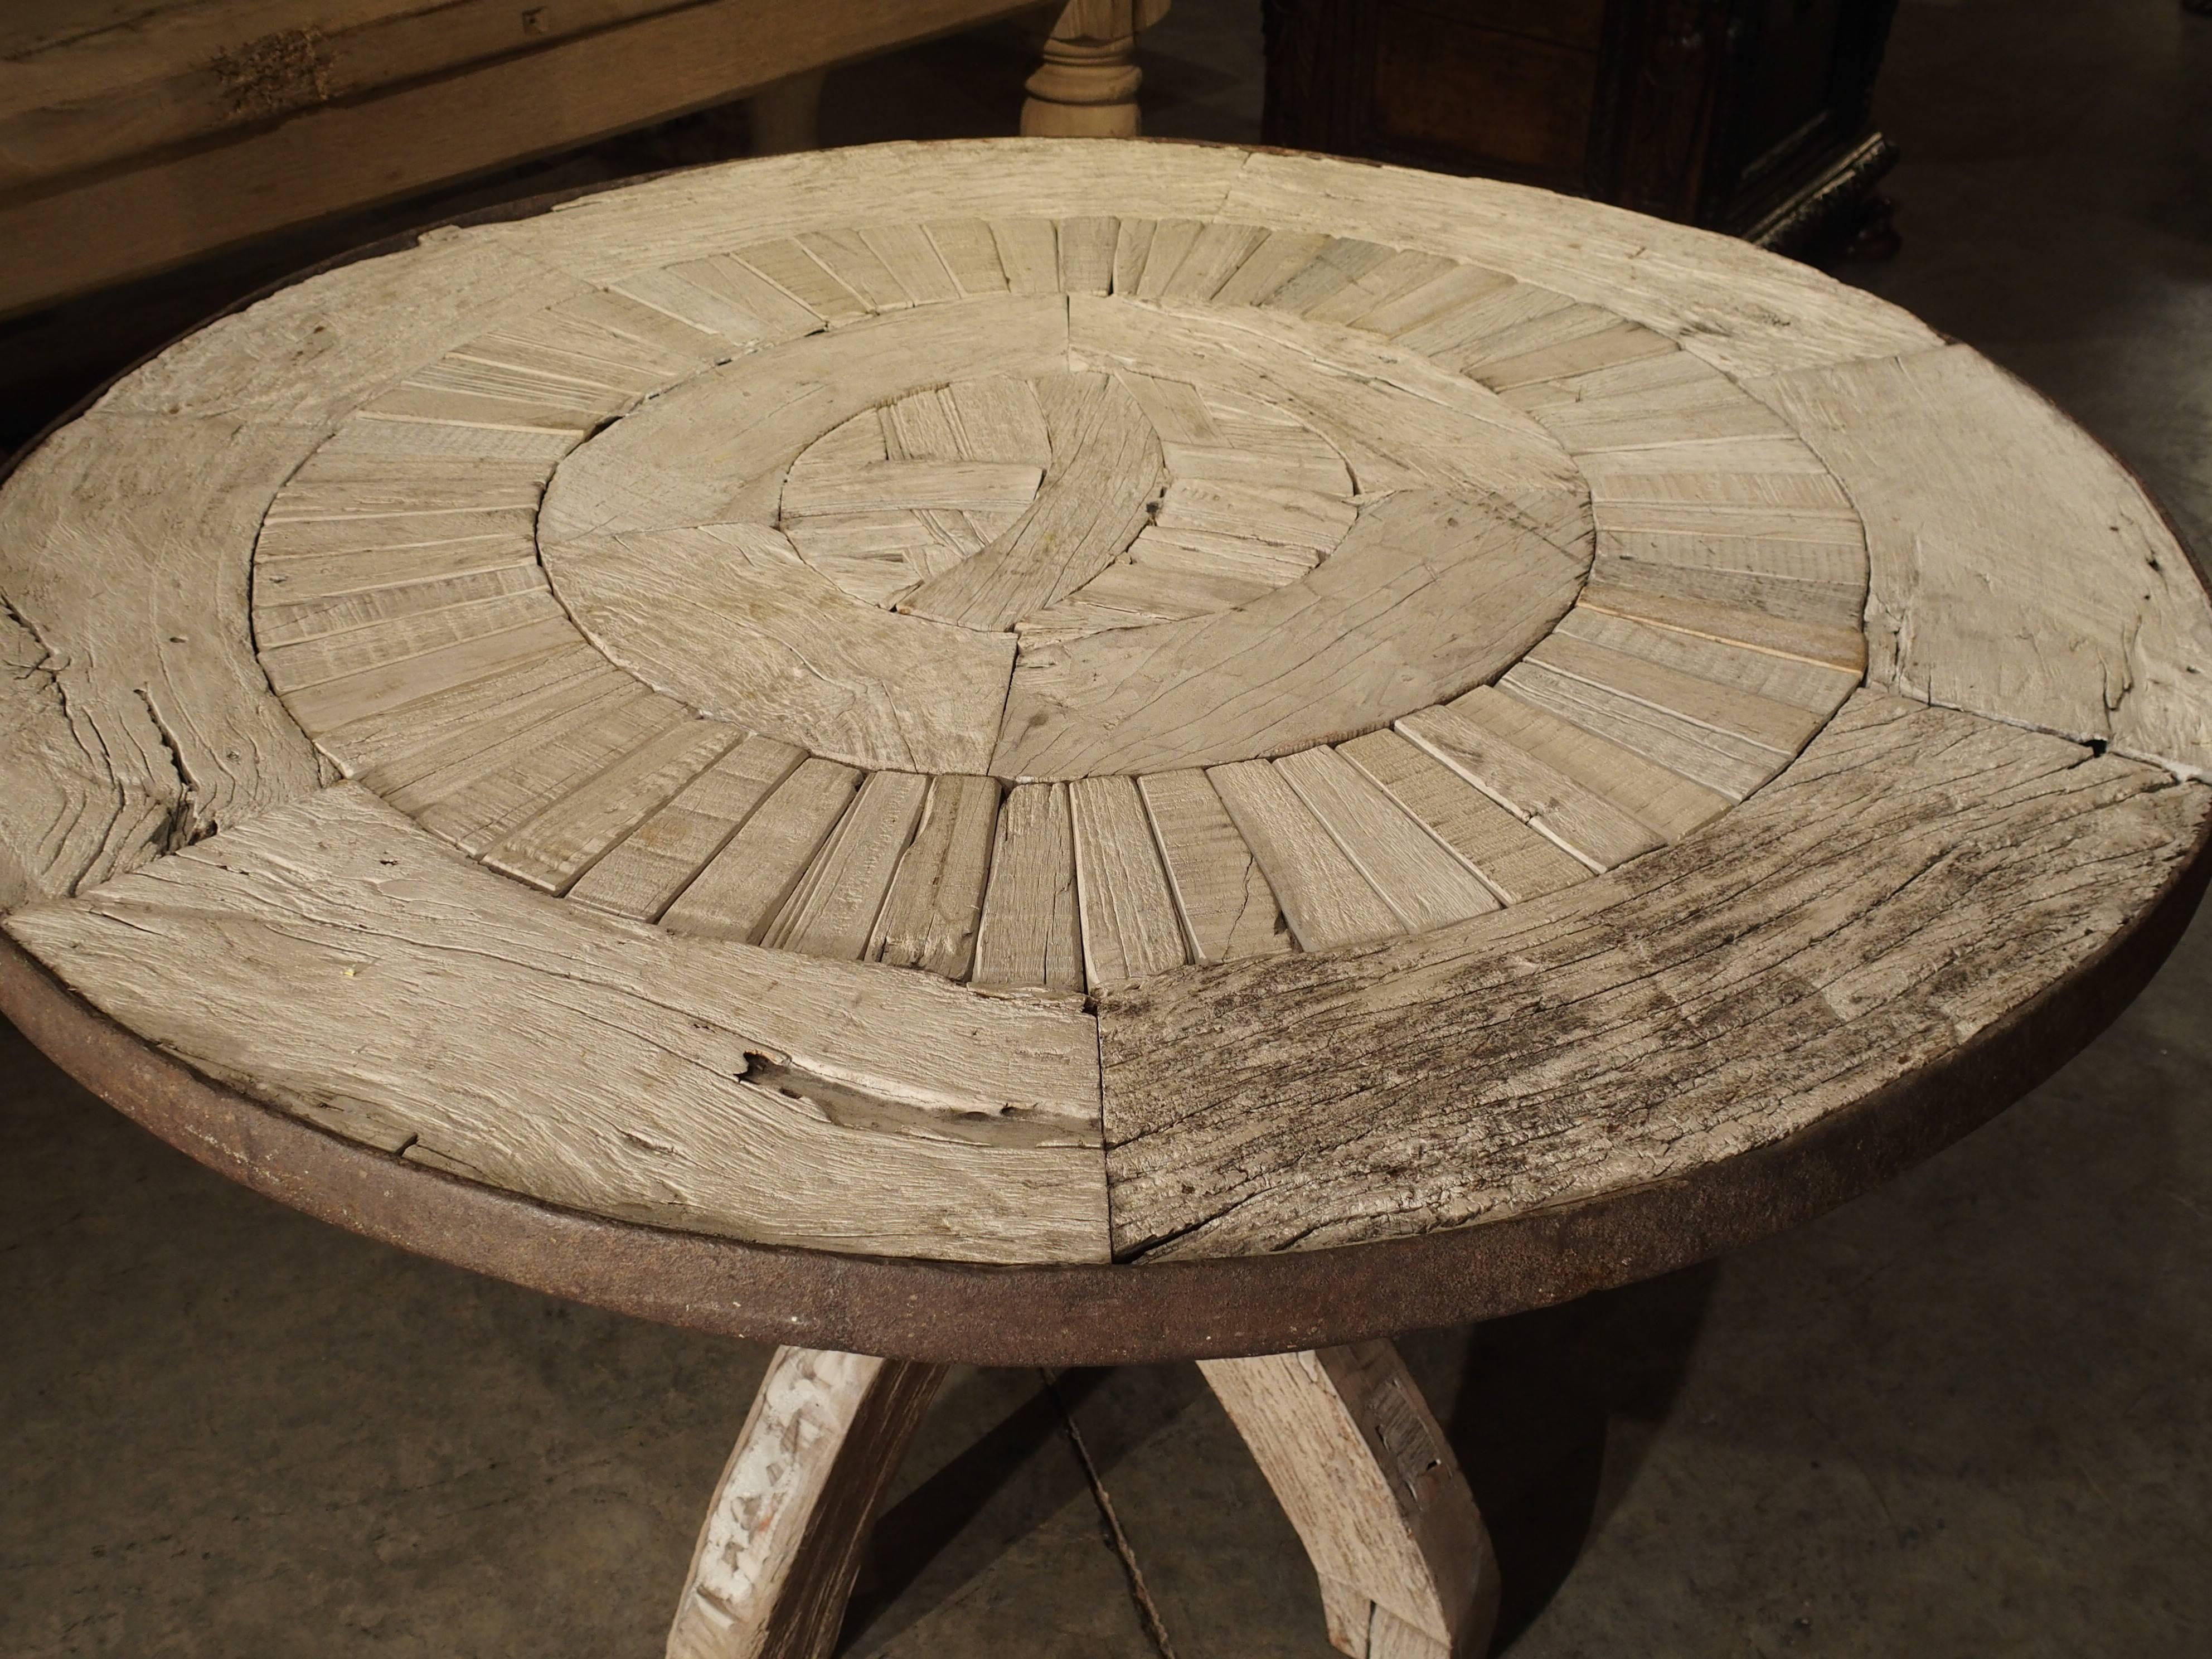 French Round Table from France Made of Salvaged Wood and Iron